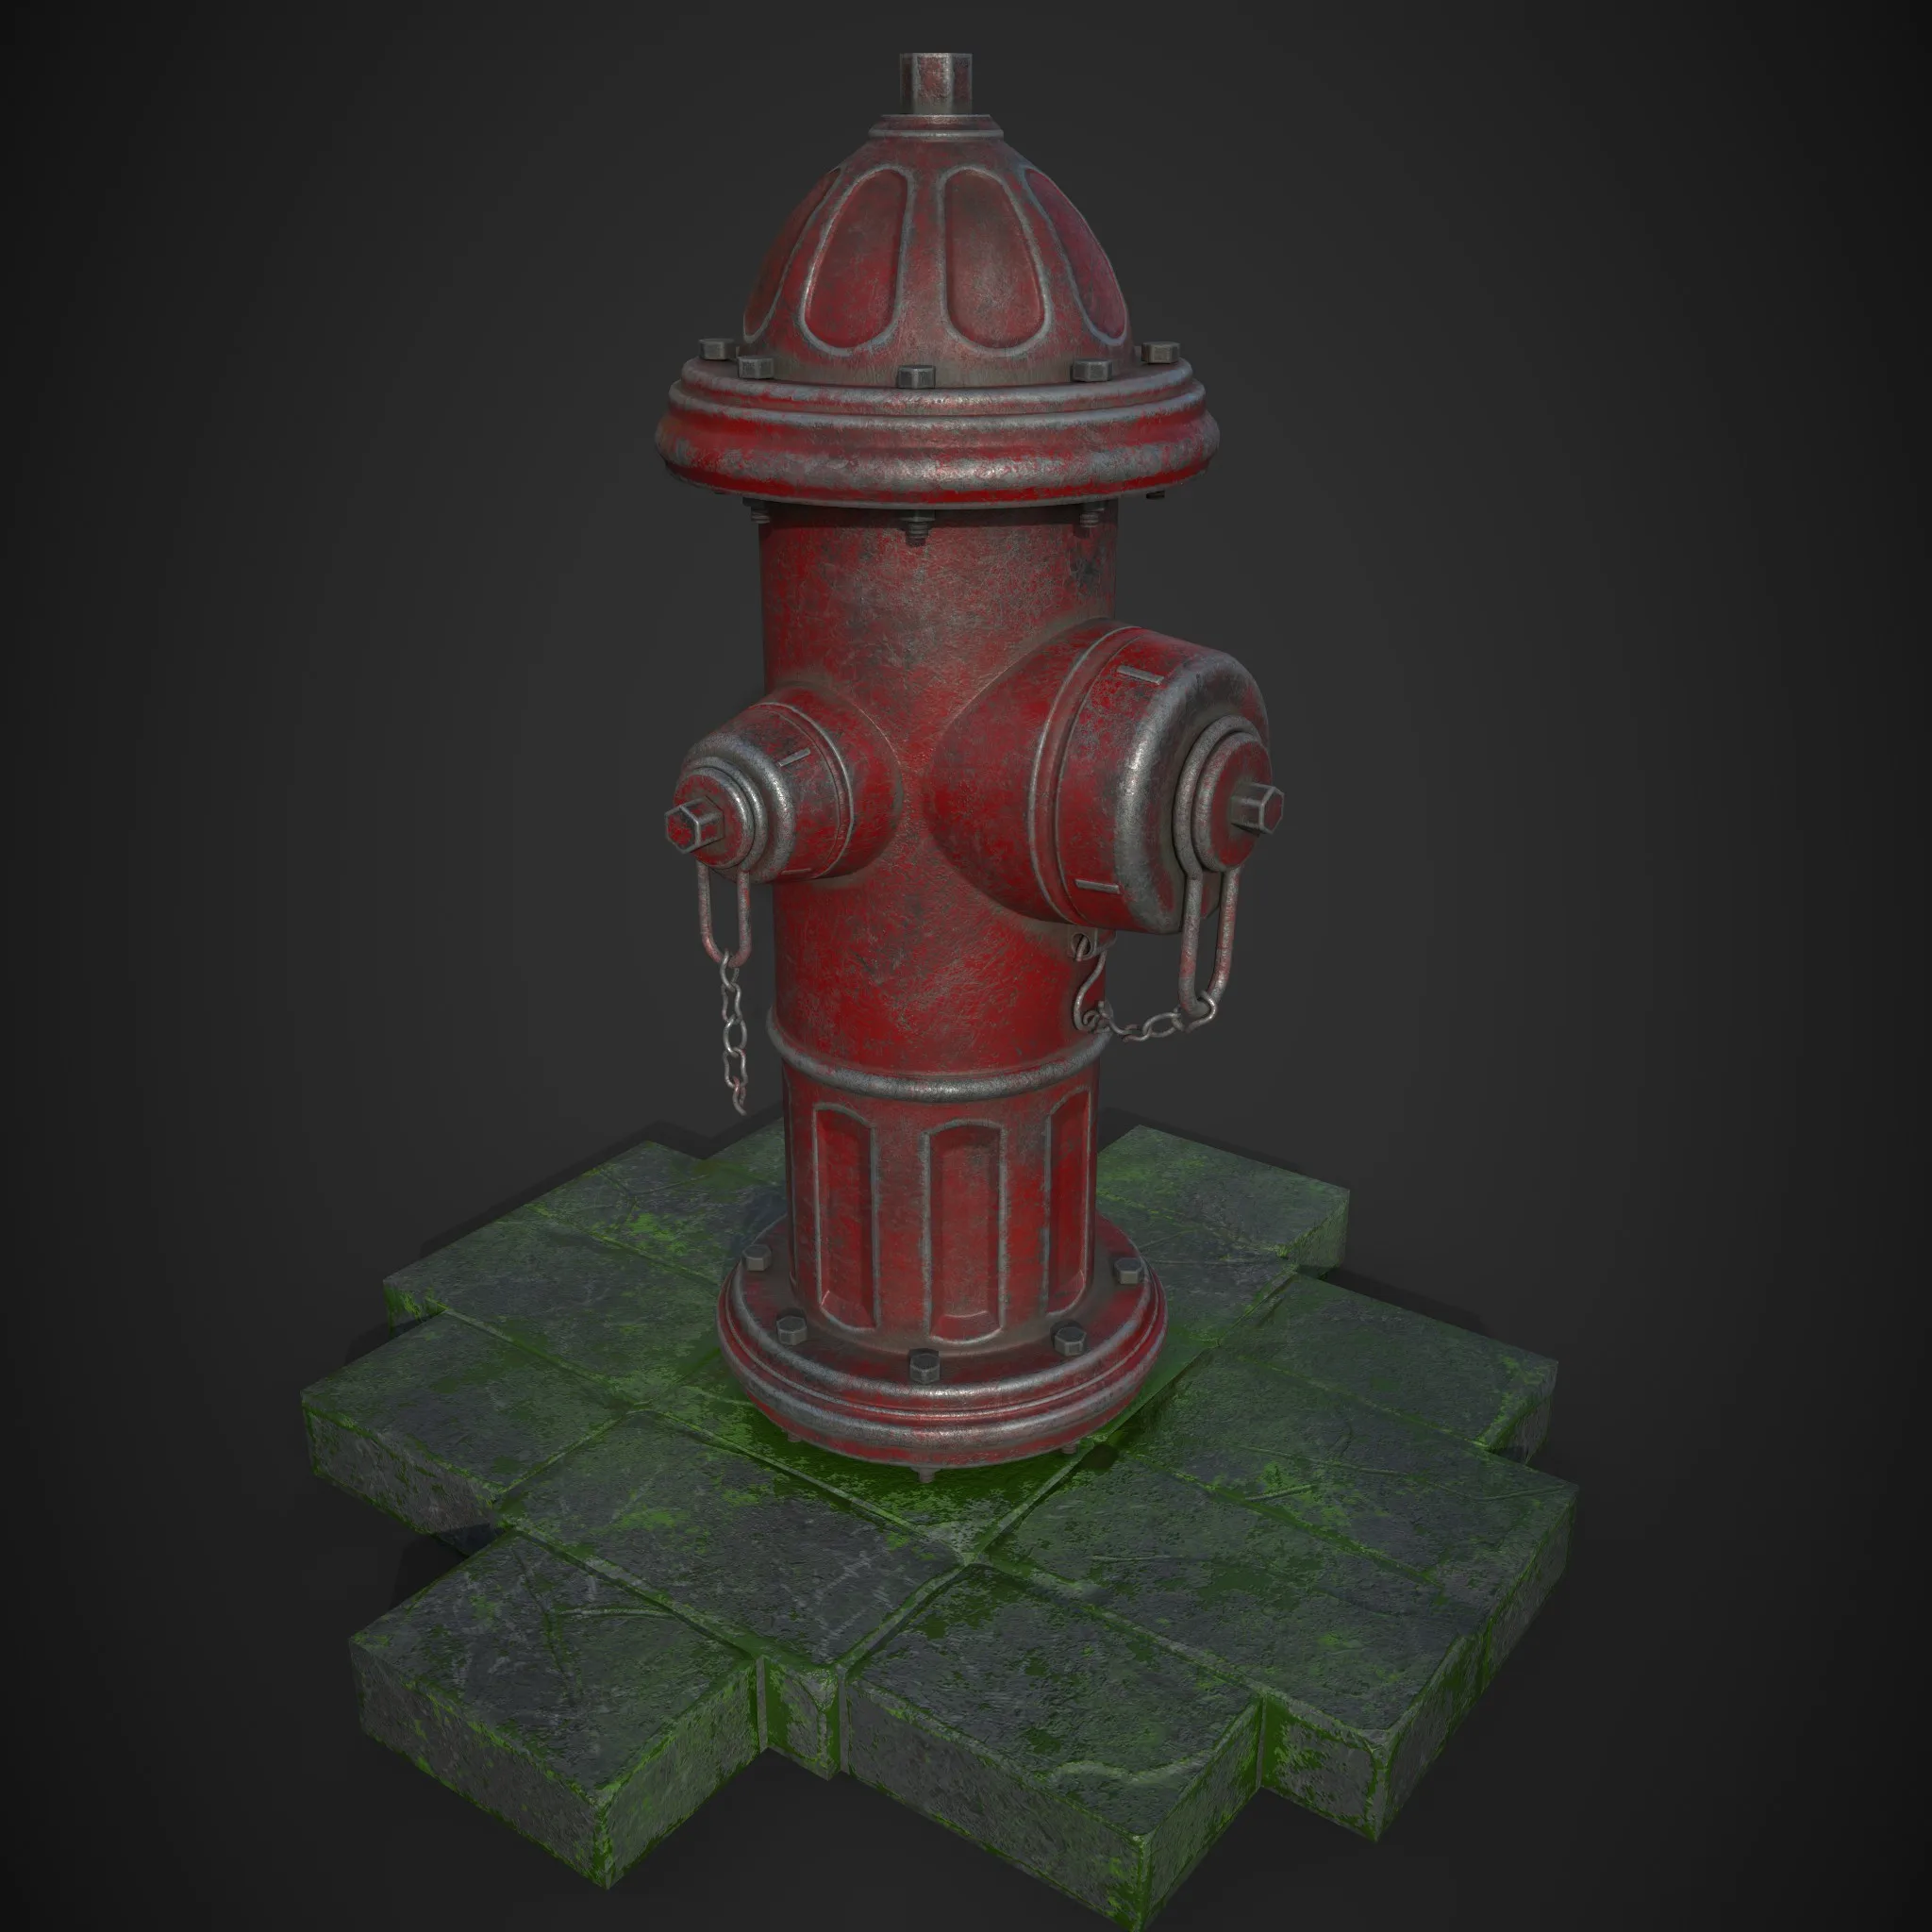 Fire Hydrant Gaming Pipeline Tutorial + Asset